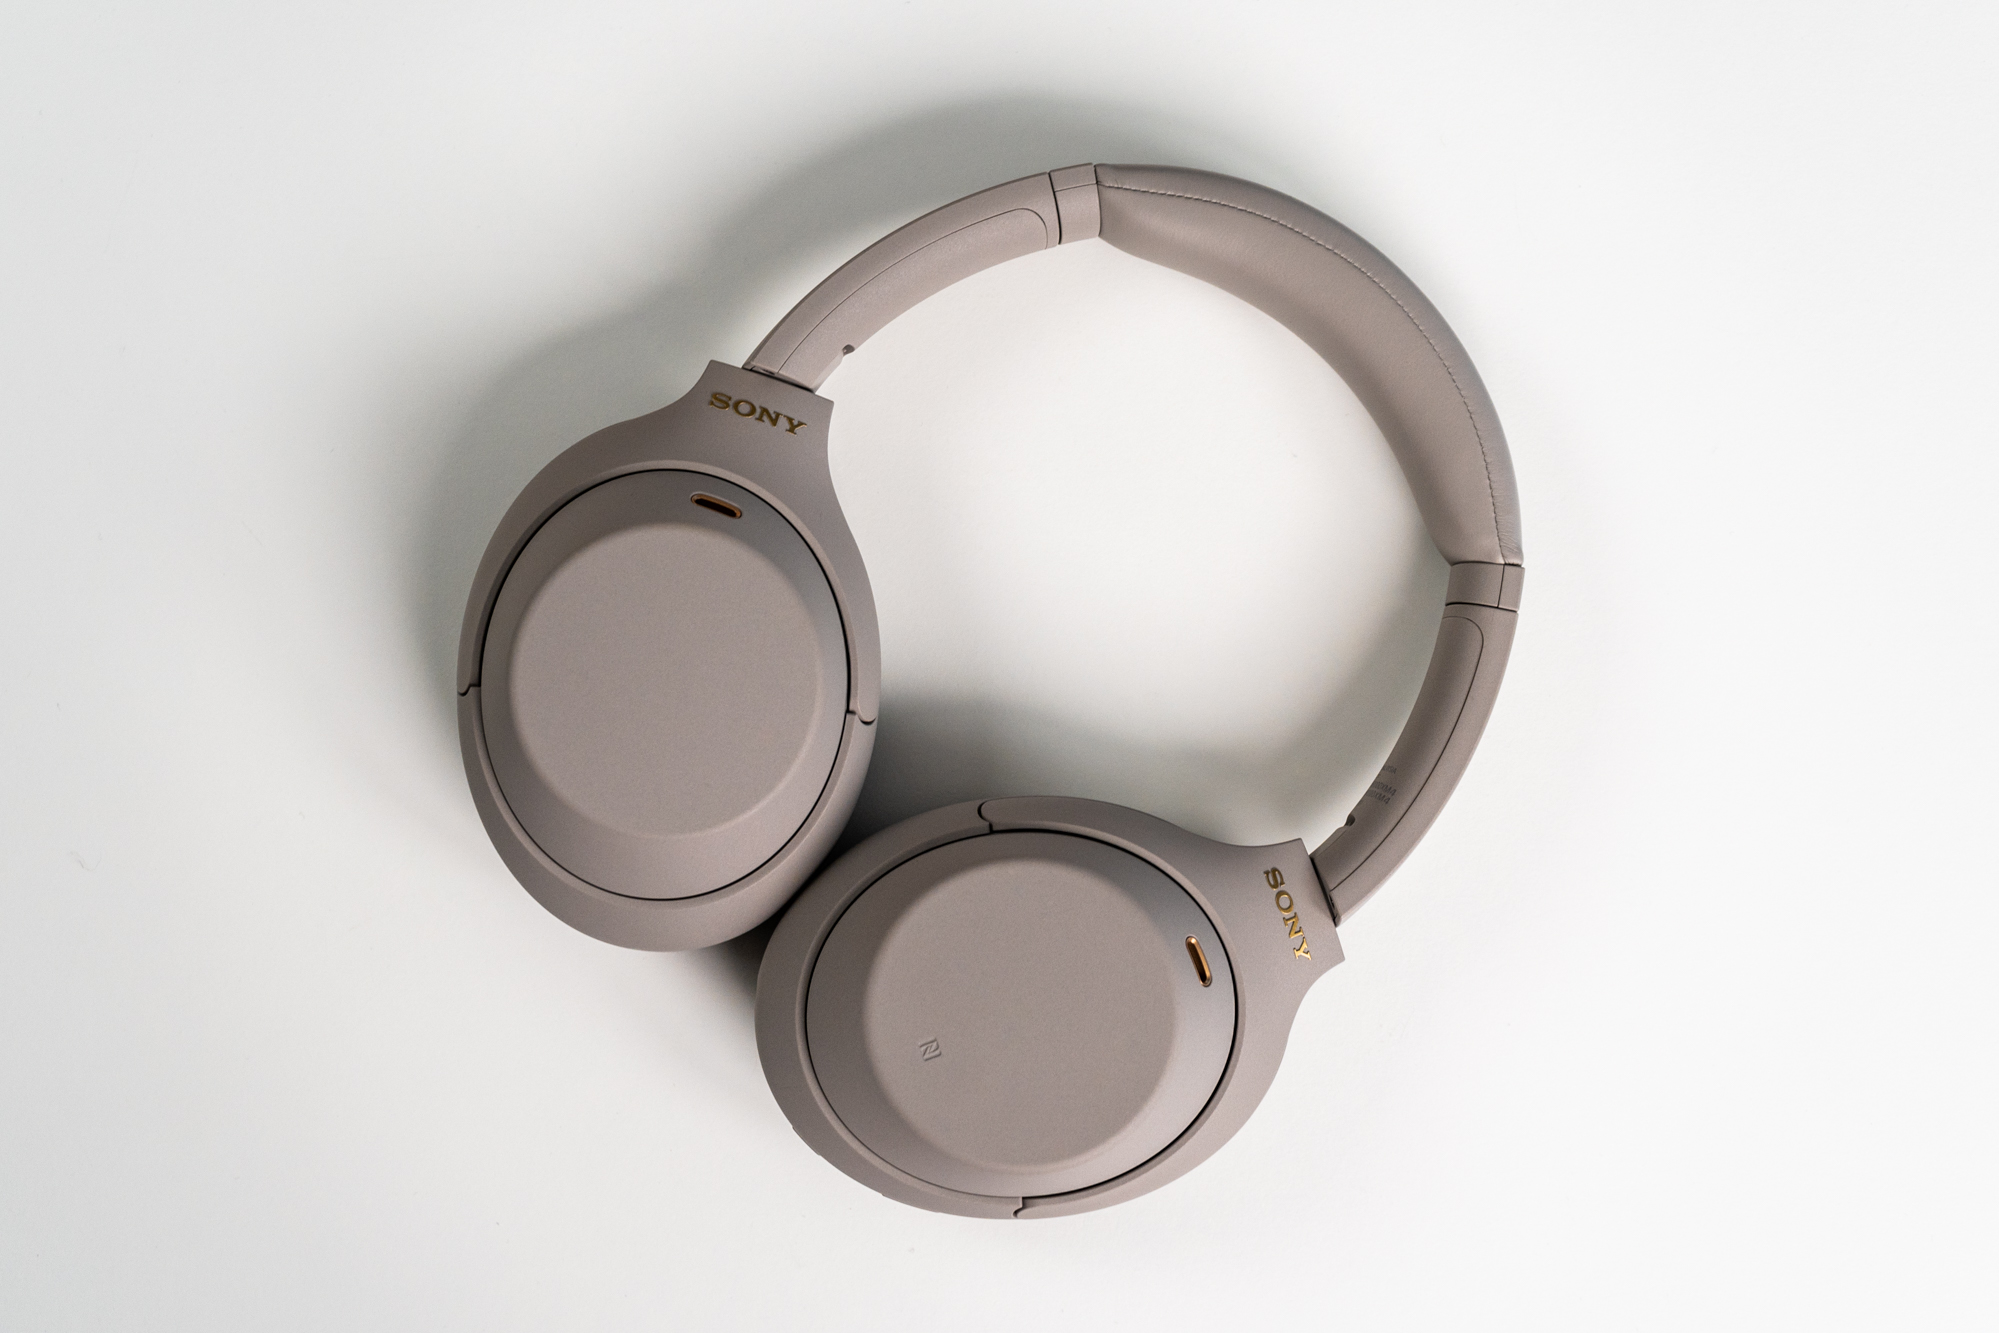 Sony WH-1000XM4 Noise-Cancelling Headphones Review 2020